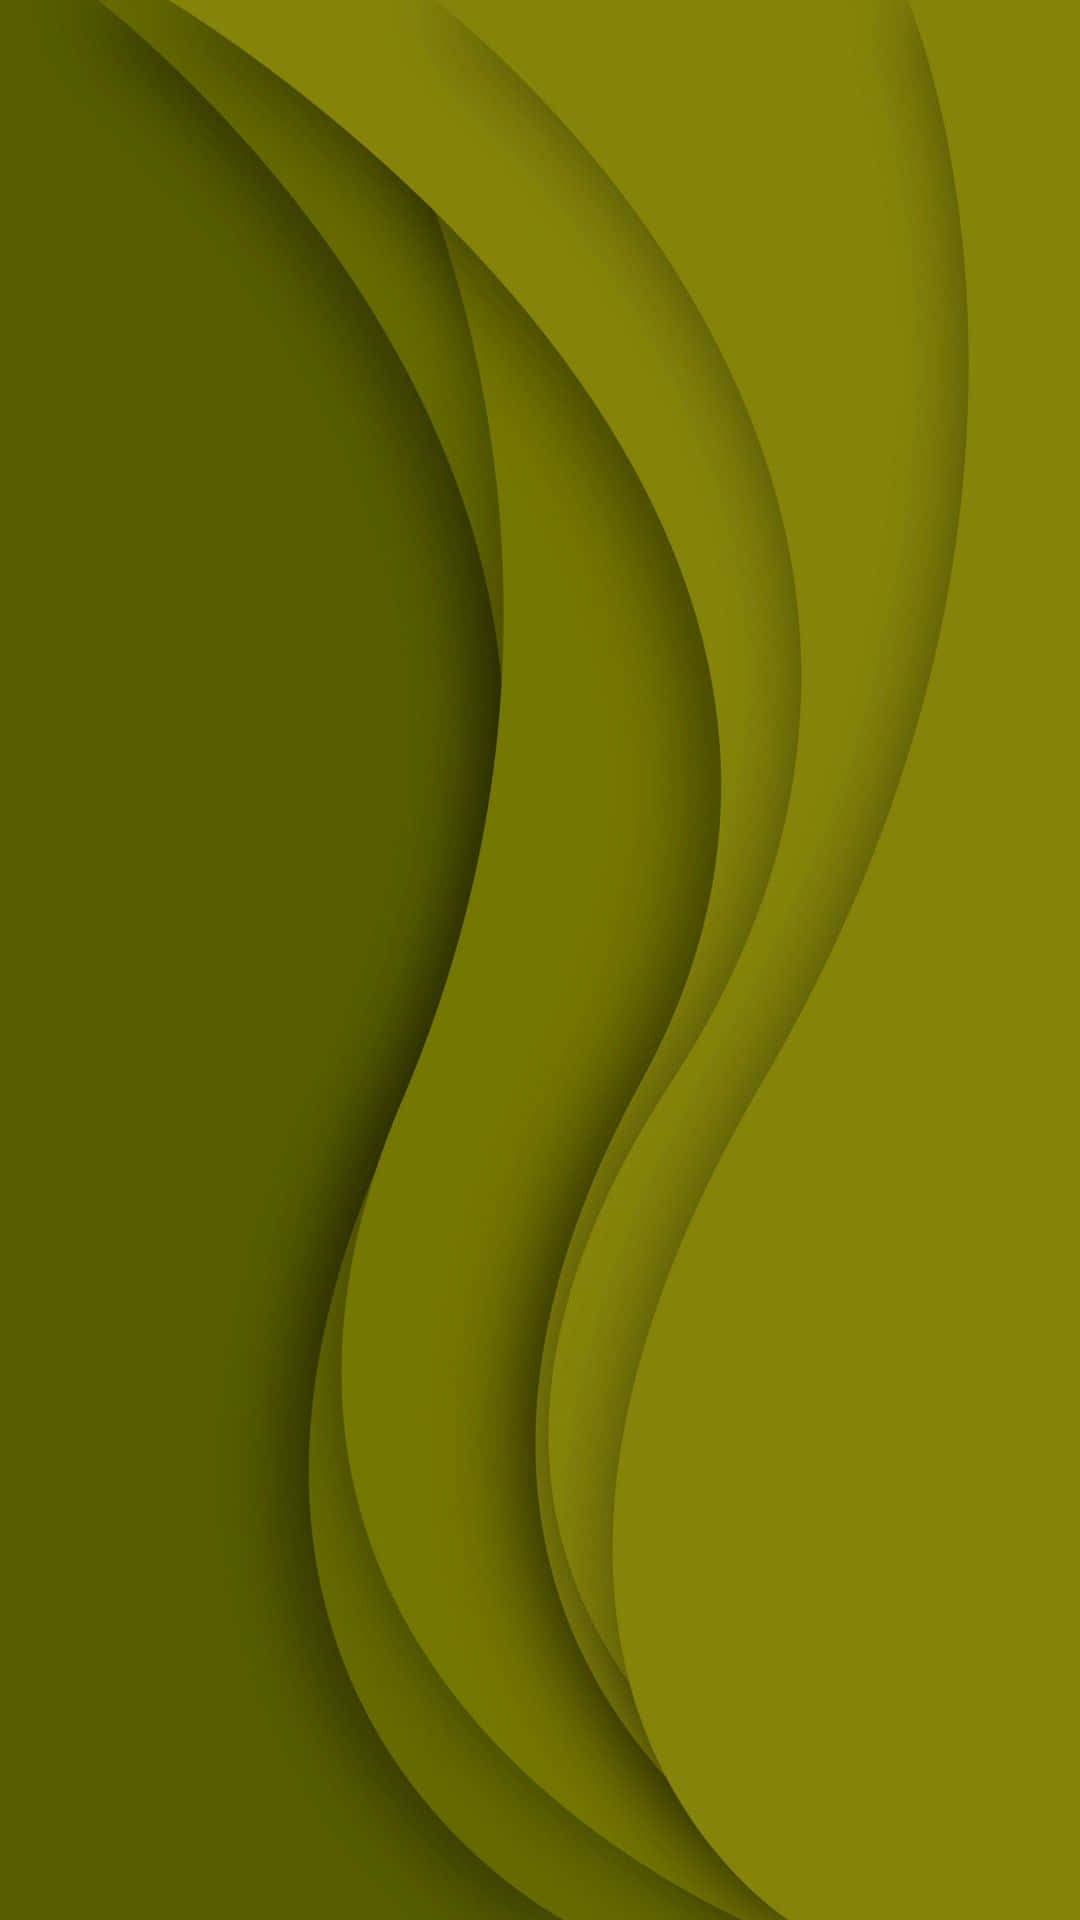 An iconic, sleek, and modern Olive Green Iphone. Wallpaper